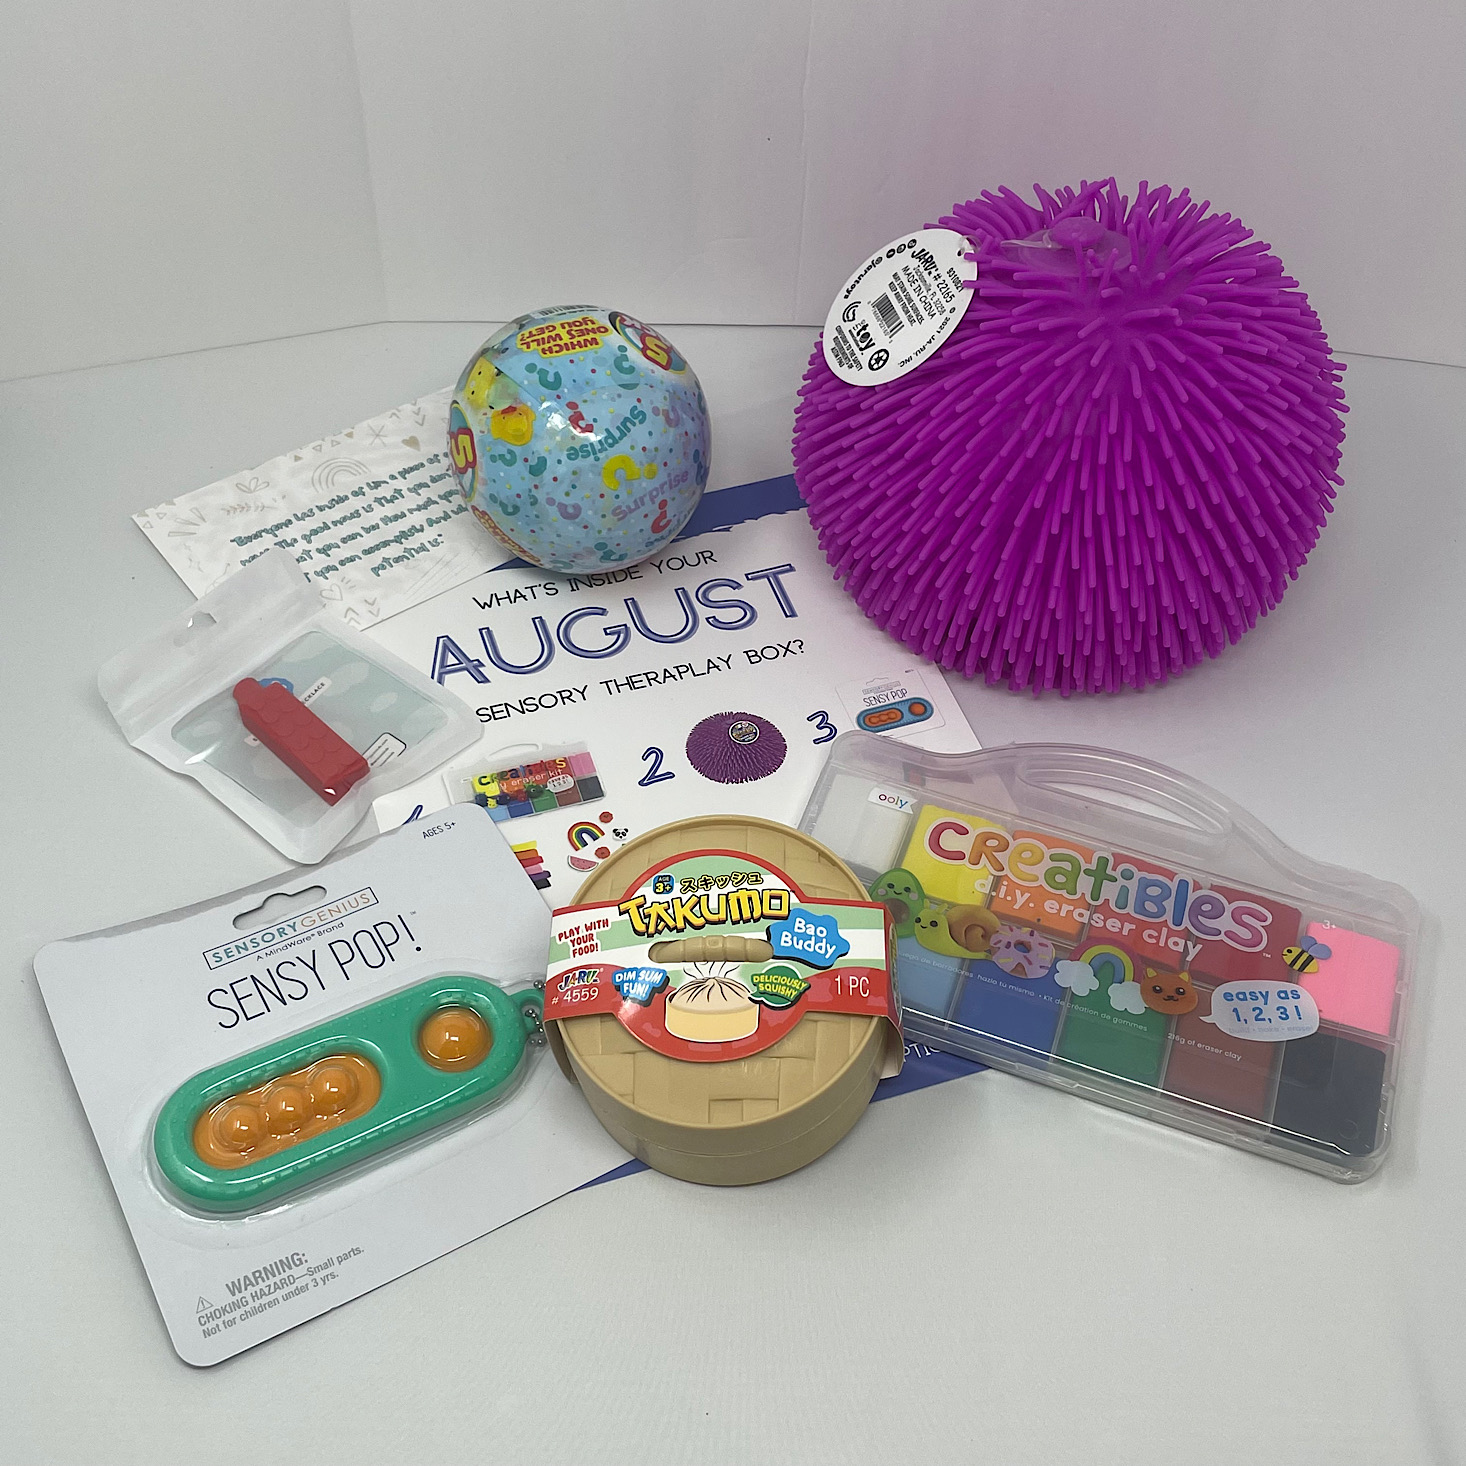 Sensory TheraPlay Box August 2022 Review + Coupon